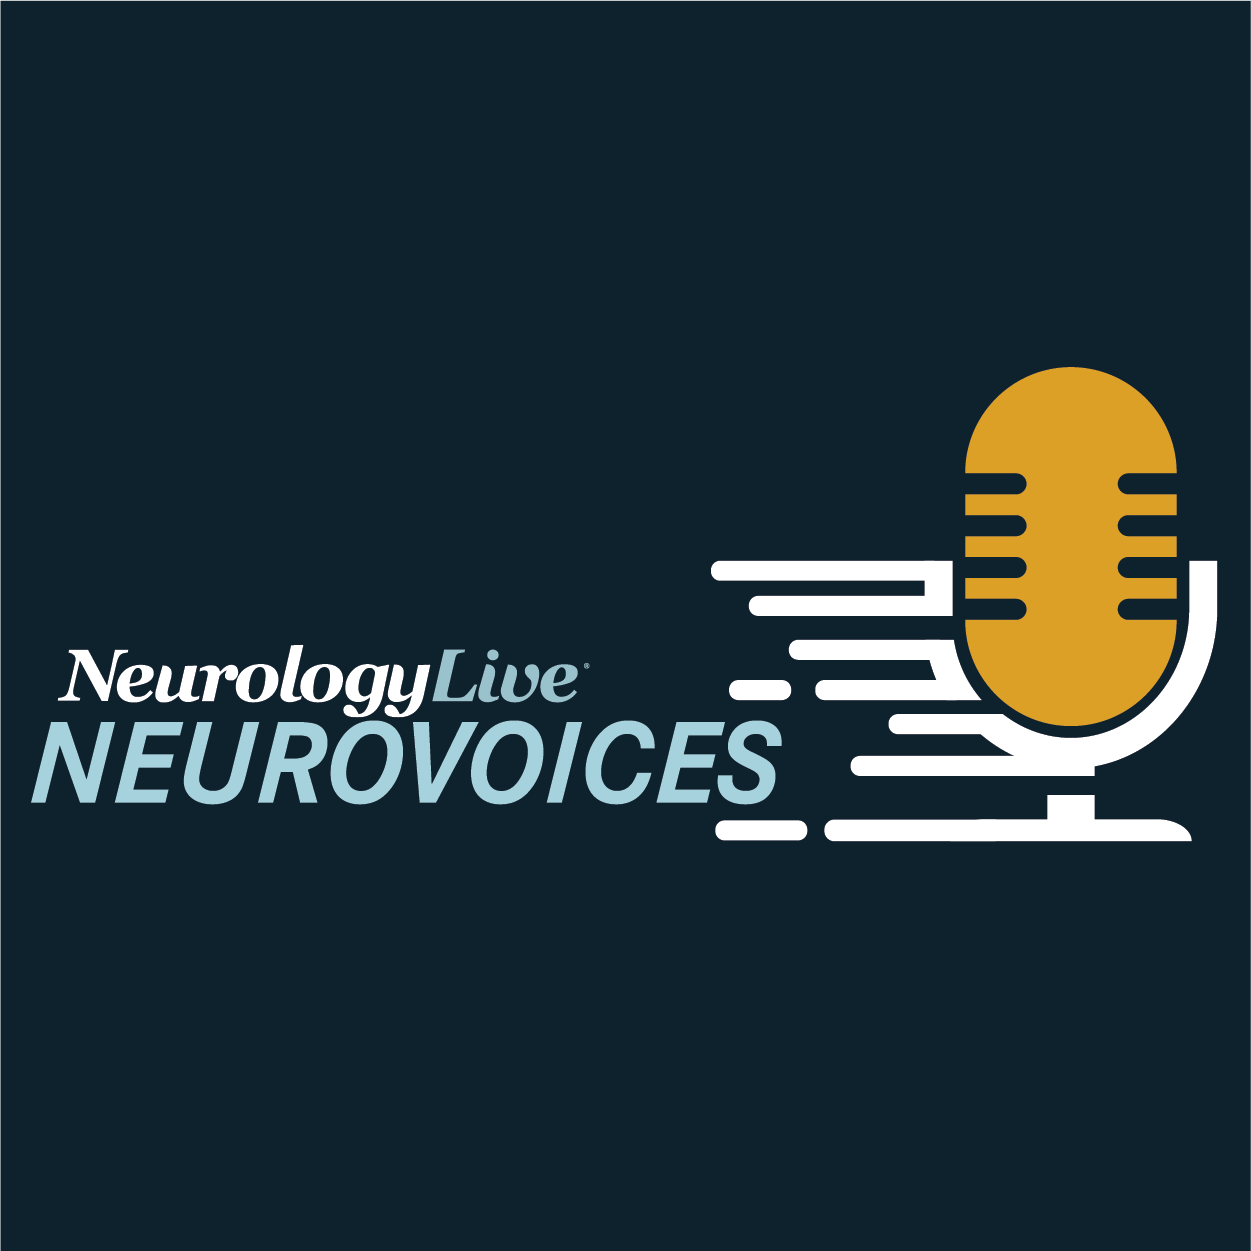 NeuroVoices: David R. Lynch, MD, PhD, on the First Potentially Approved Friedreich Ataxia Treatment